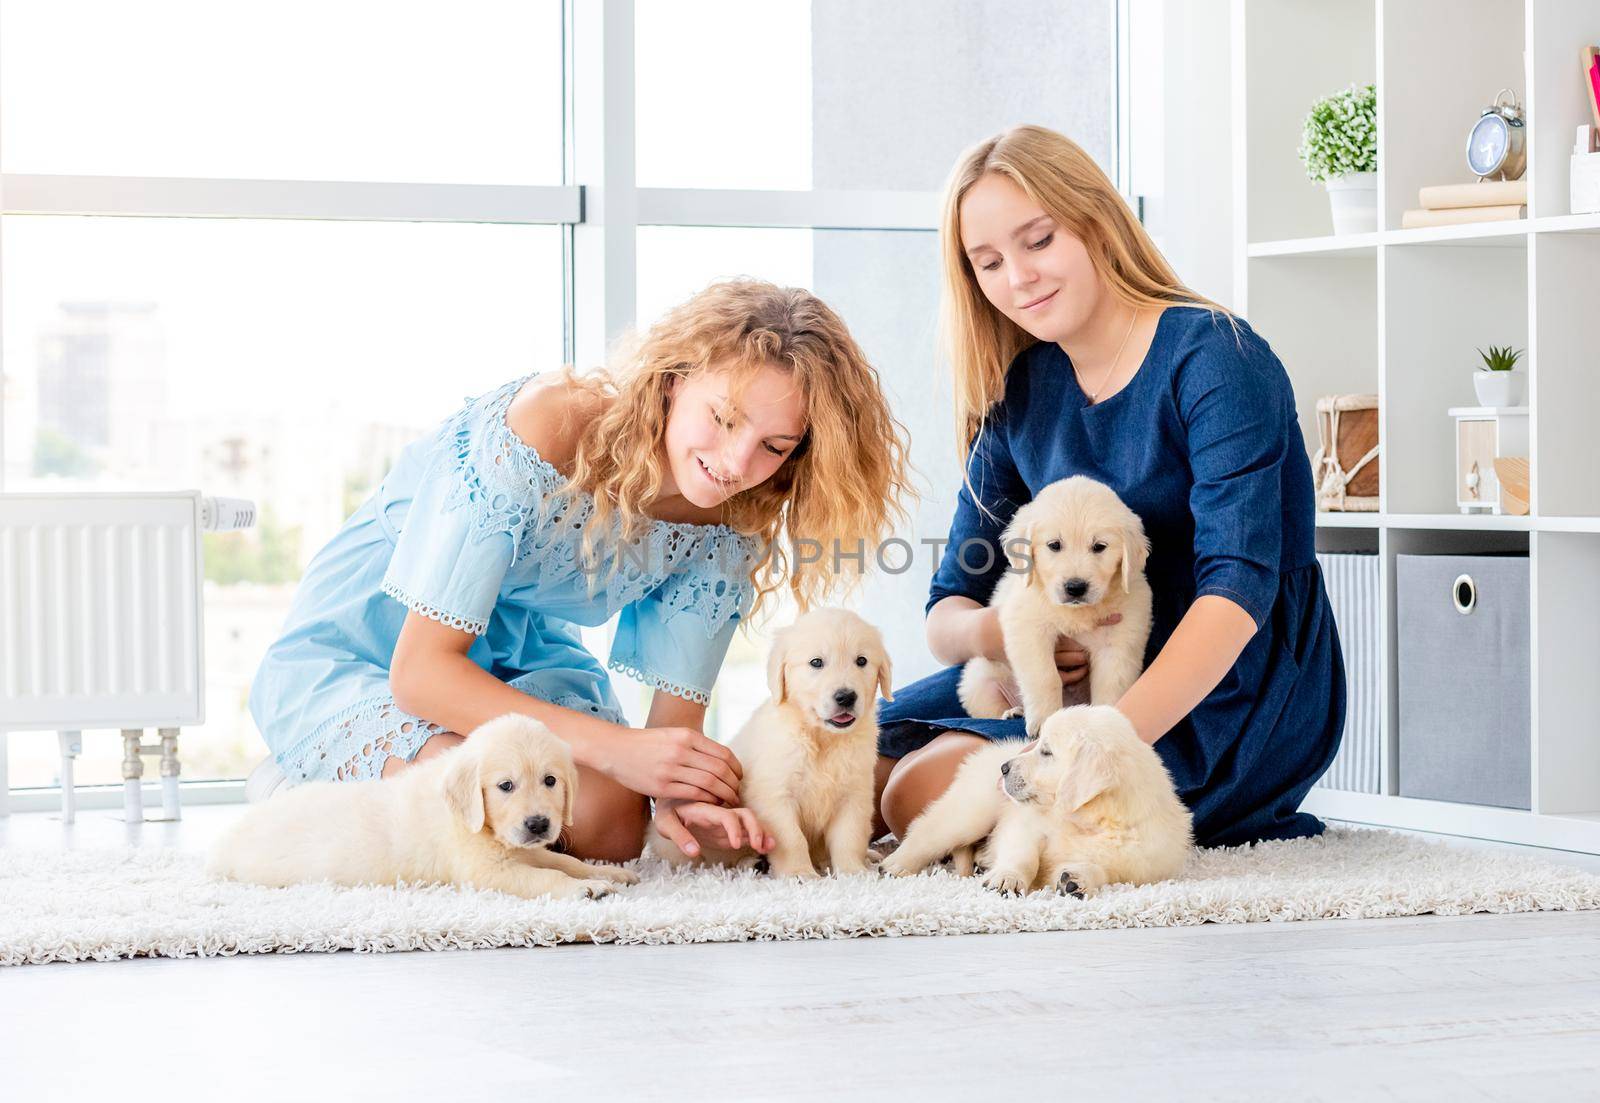 Beautiful girls playing with retriever puppies in light room